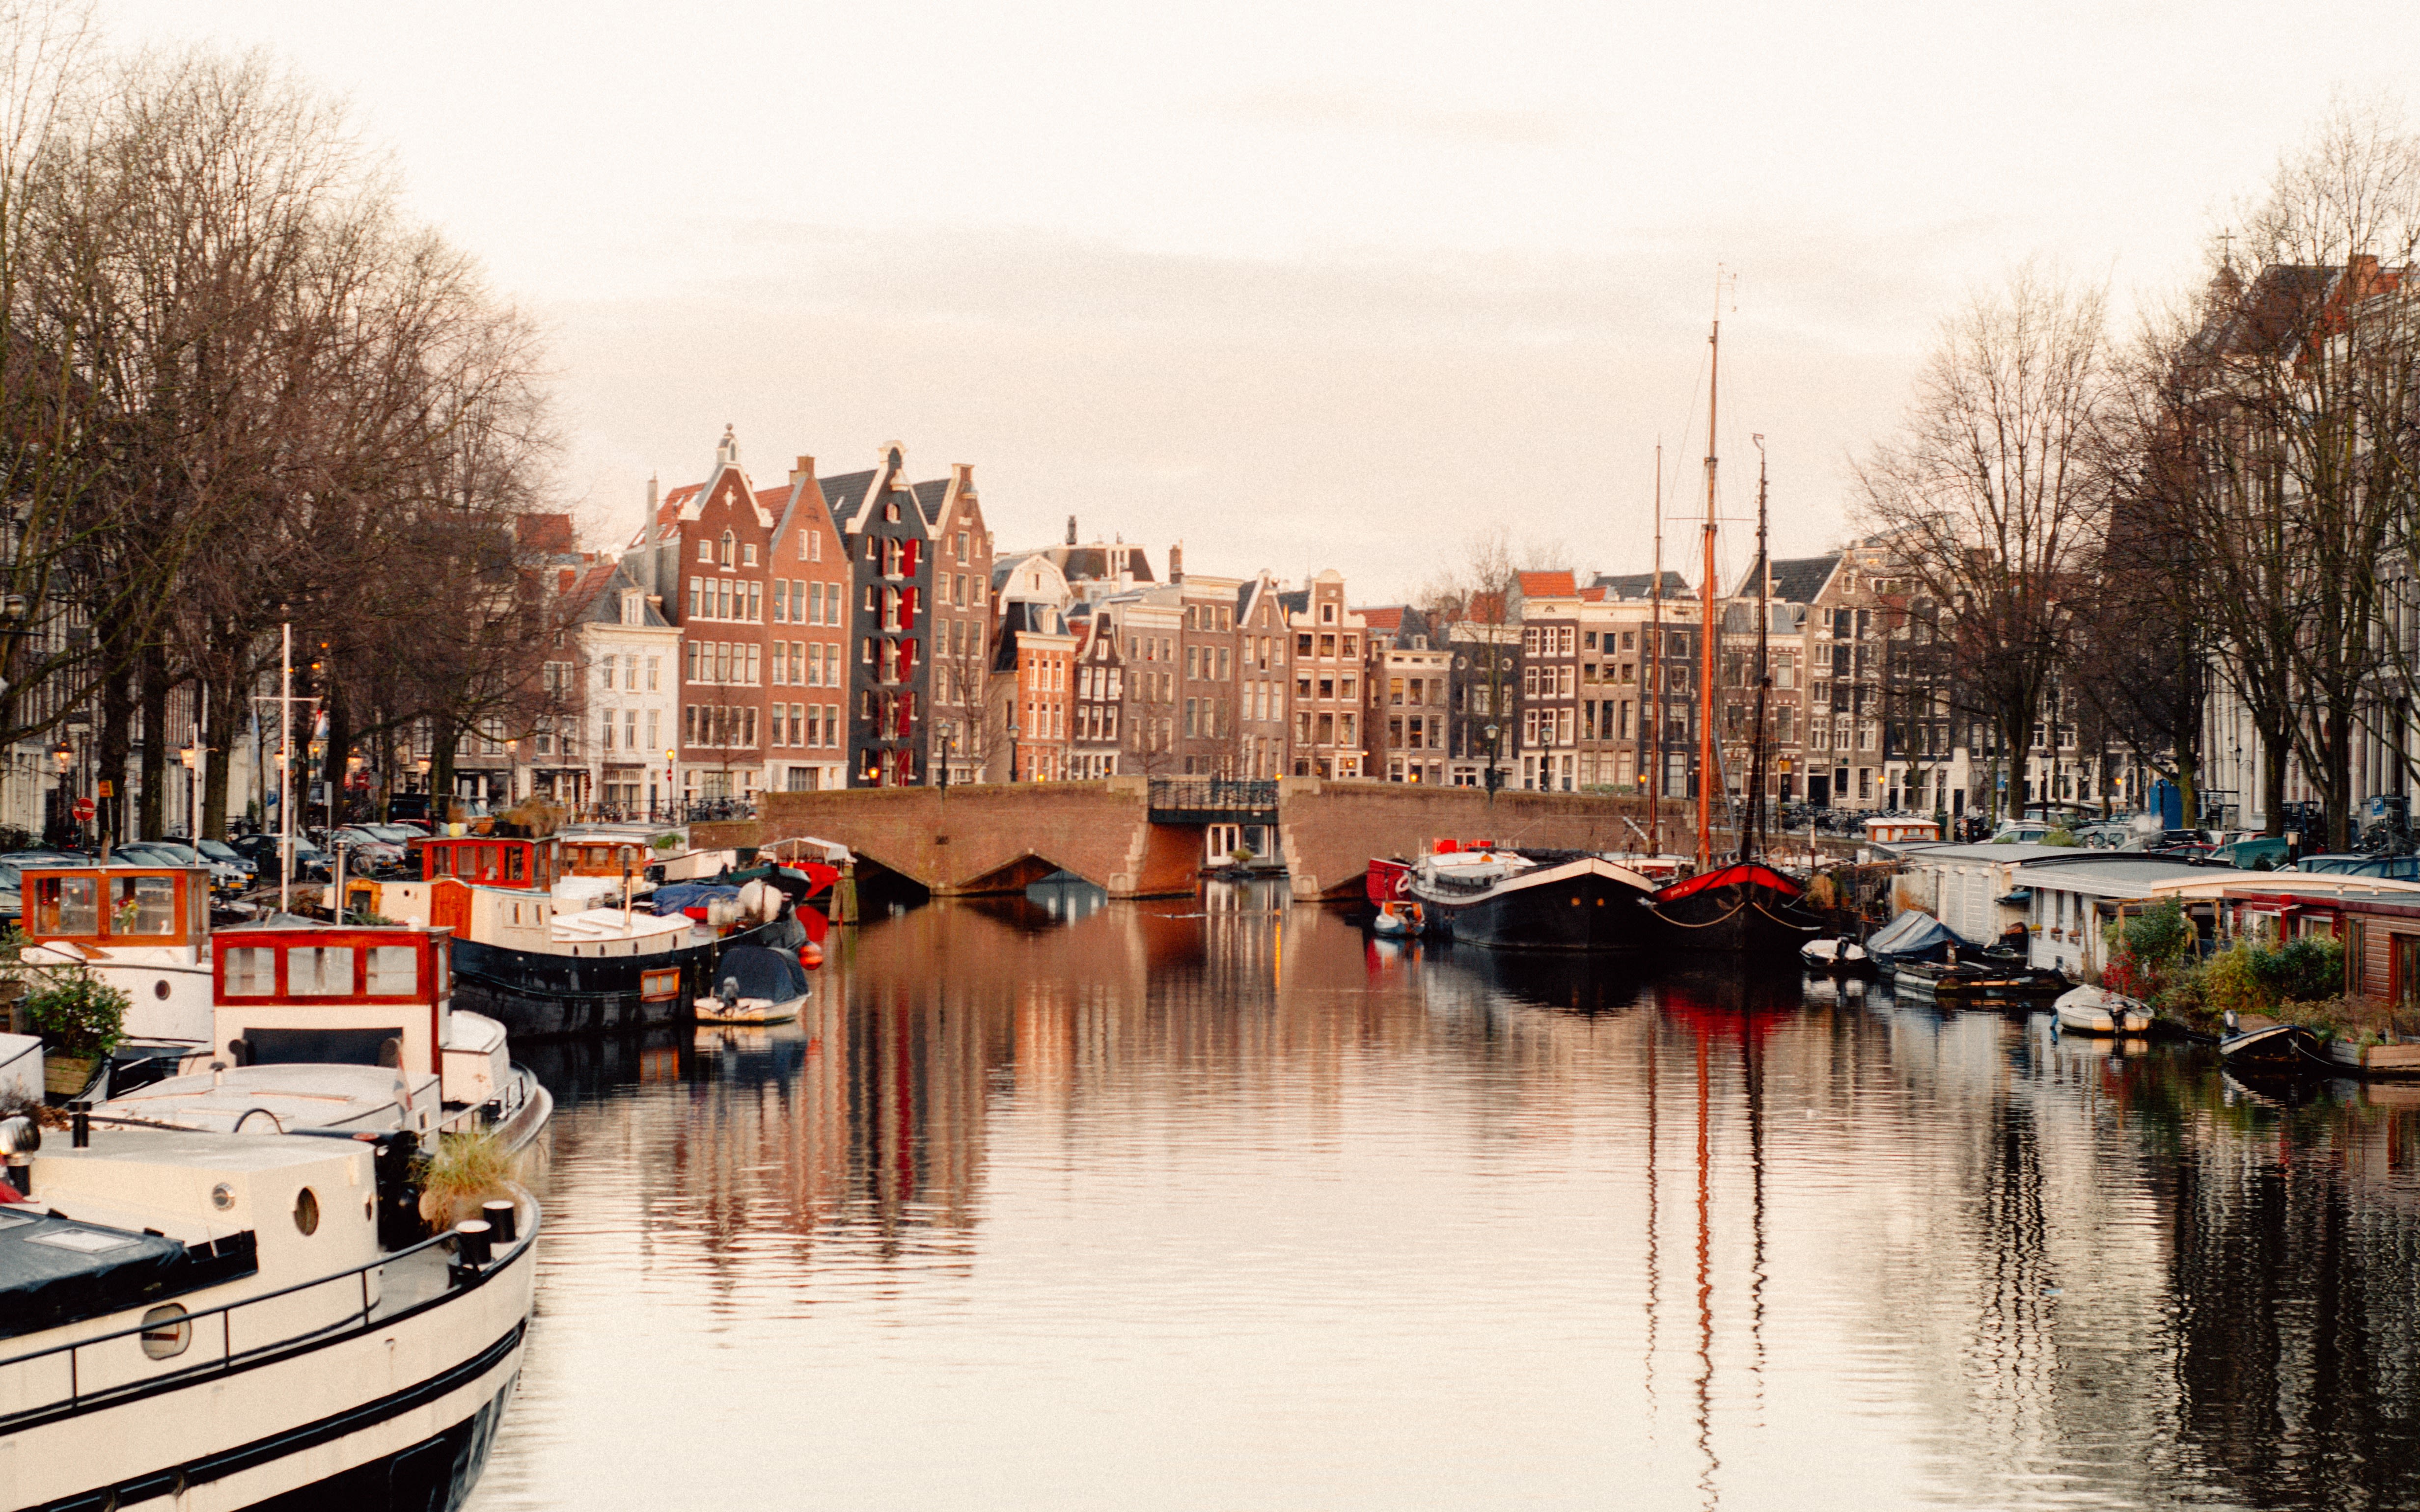 Image of the canal in Amsterdam with boats and buildings.